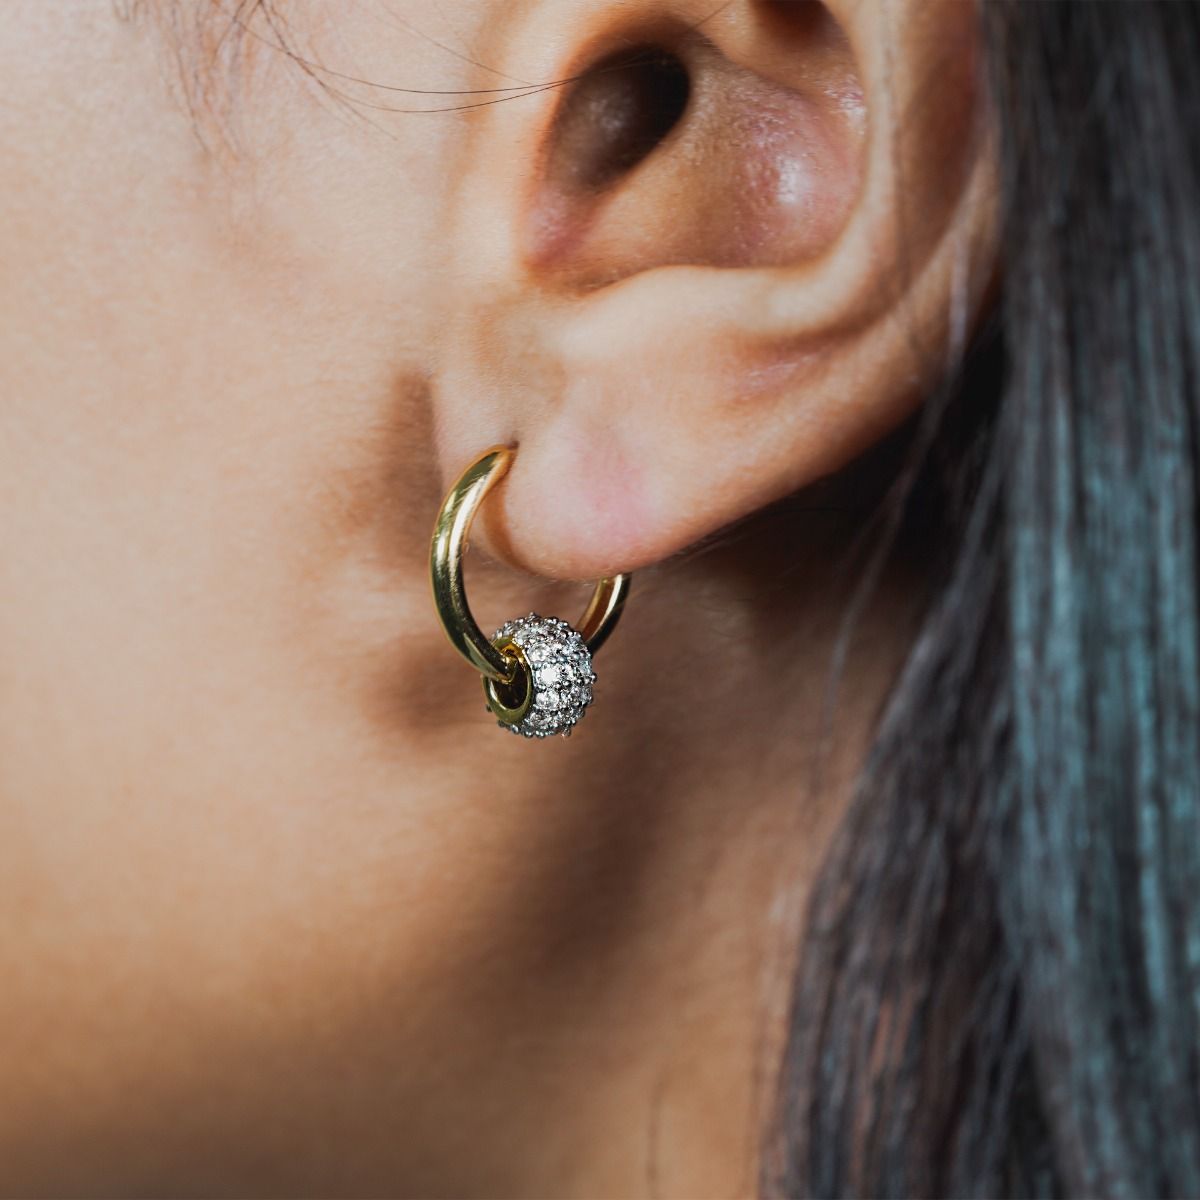 Elevate your style with our Two-Tone Pave Barrel Hoop Earrings. These exquisite earrings combine a polished gold hoop with a cubic zirconia encrusted barrel. Perfect for adding a touch of sophistication and eye-catching detail to any outfit. 
